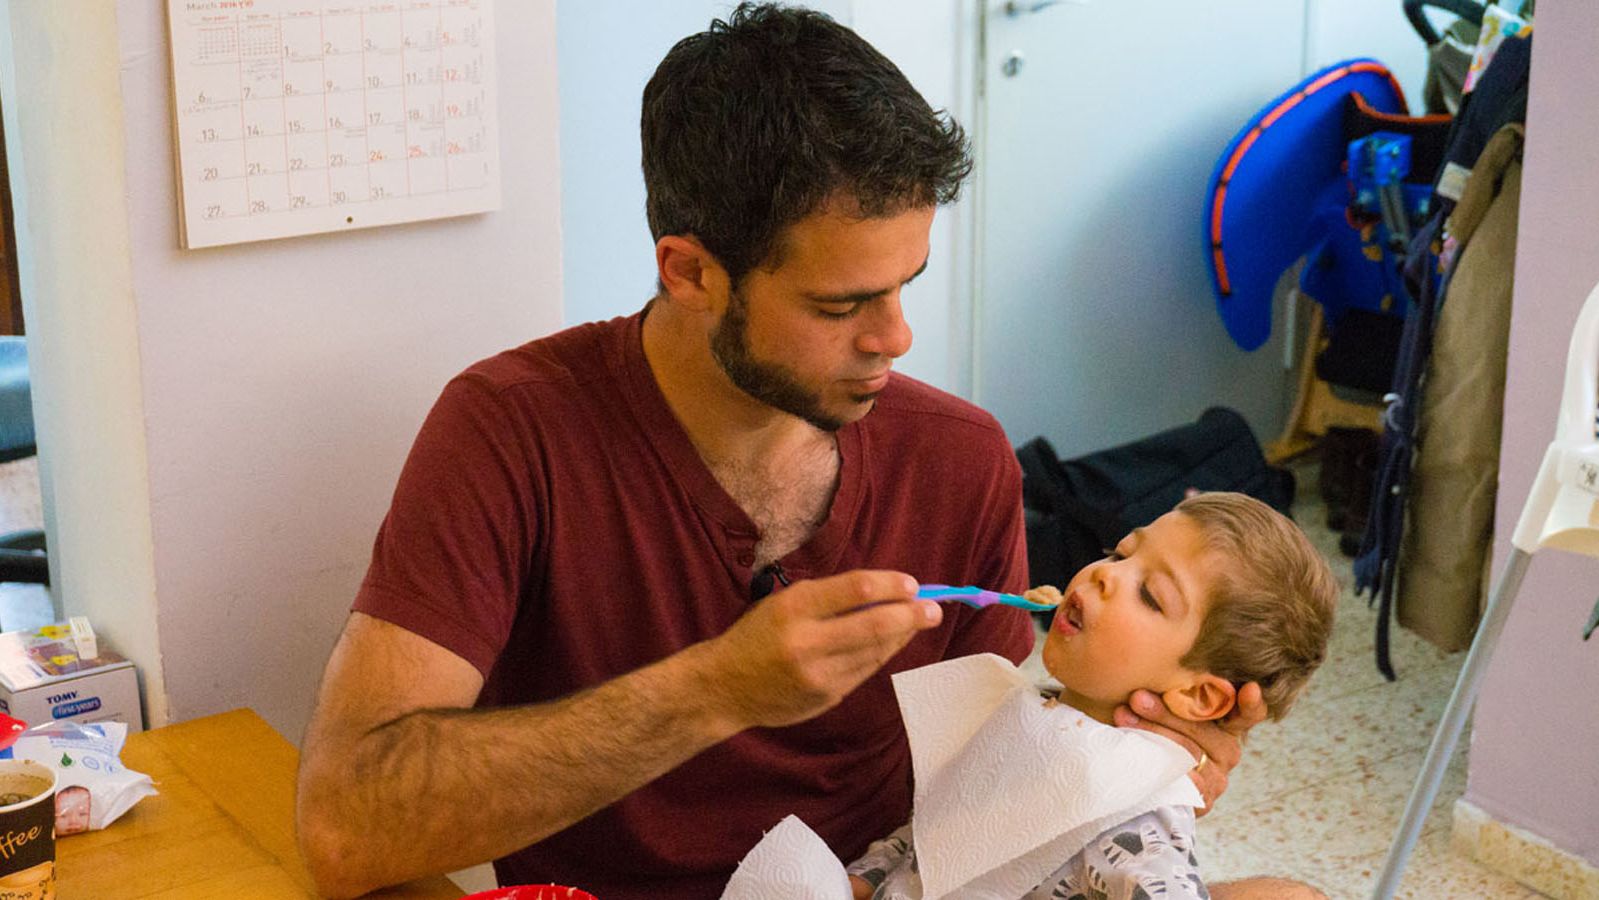 Asaf Parush administers medical cannabis oil to his son Lavie to treat his epilepsy.